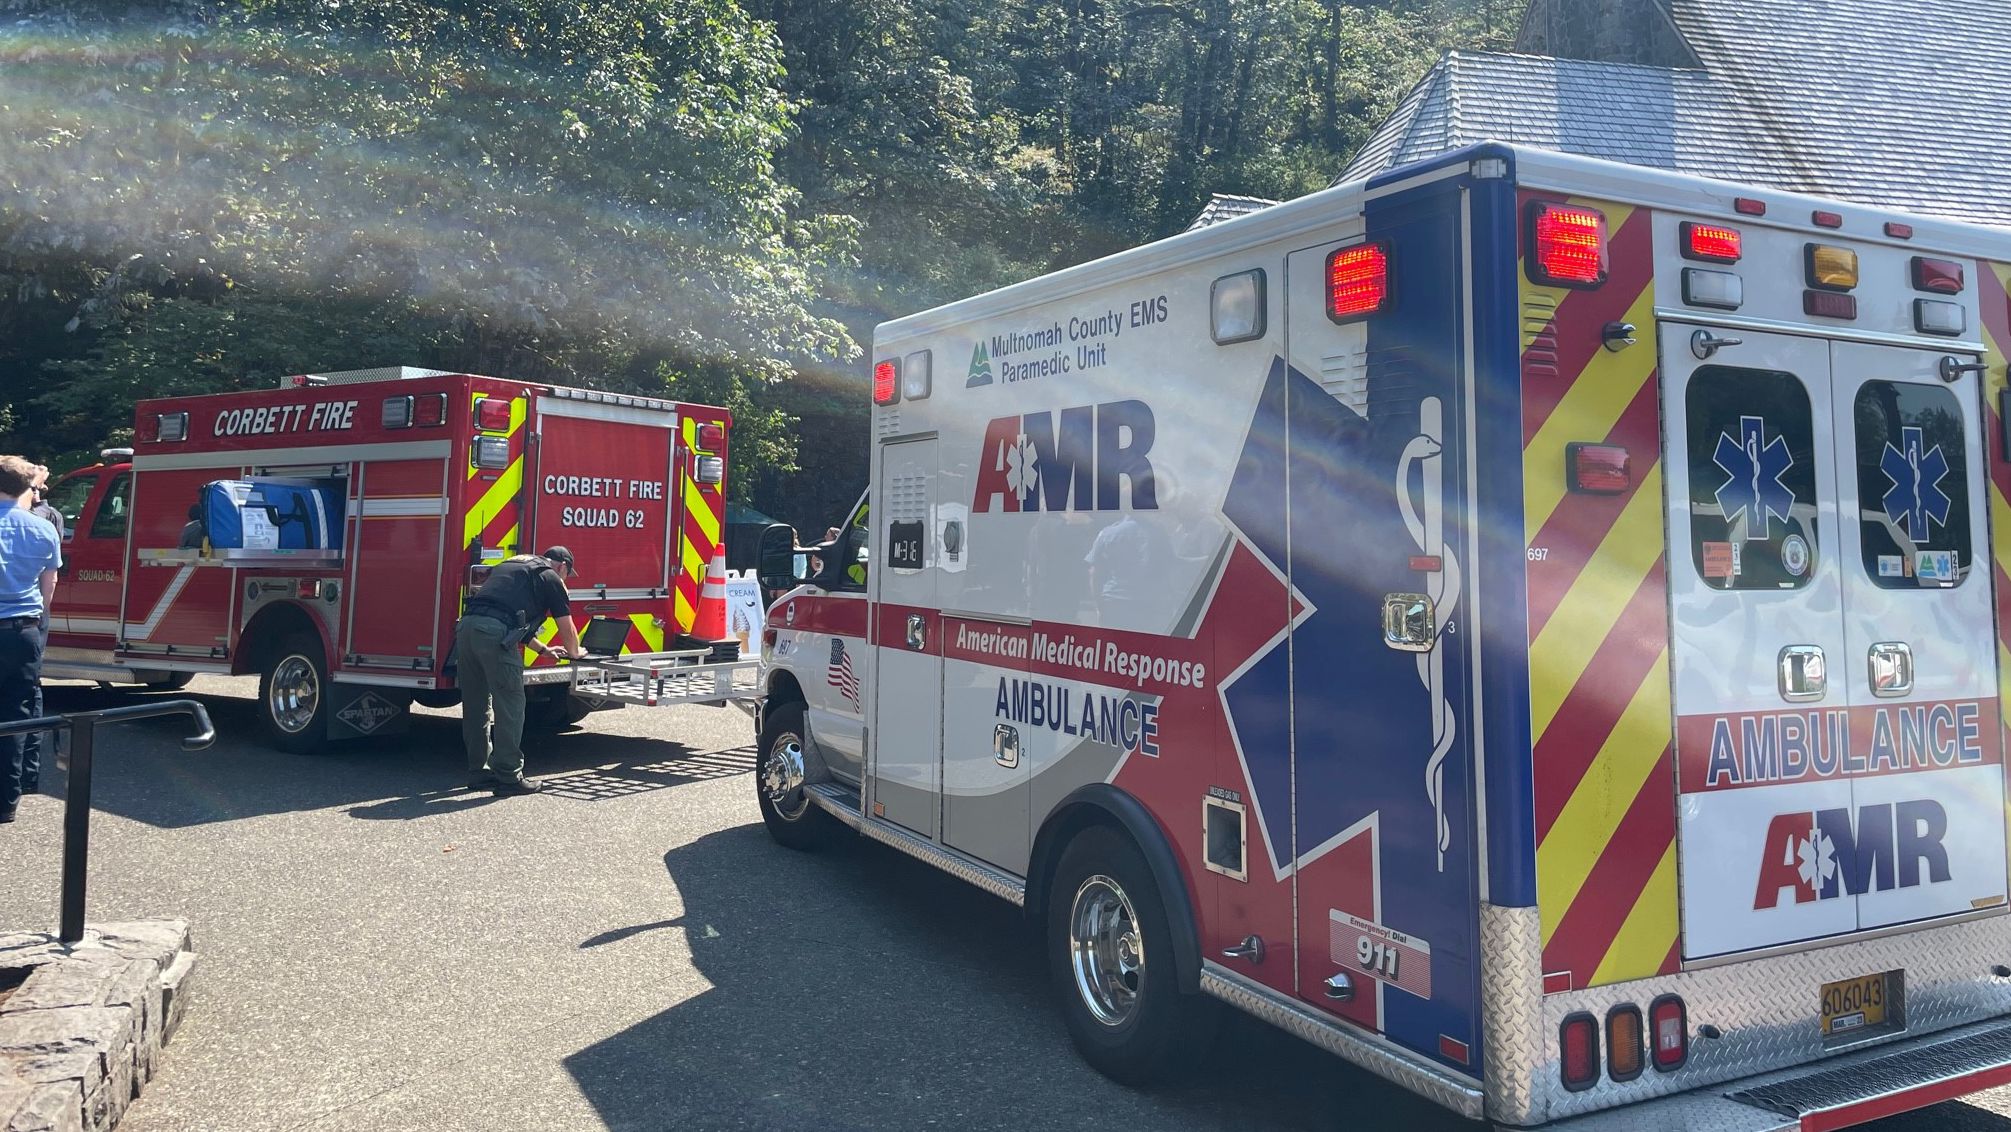 A woman hiking with a group of friends in the Columbia River Gorge outside Portland, Oregon, on Friday, died after falling approximately 100 feet and suffering a head injury, according to a release from the Multnomah County Sheriff's Office.